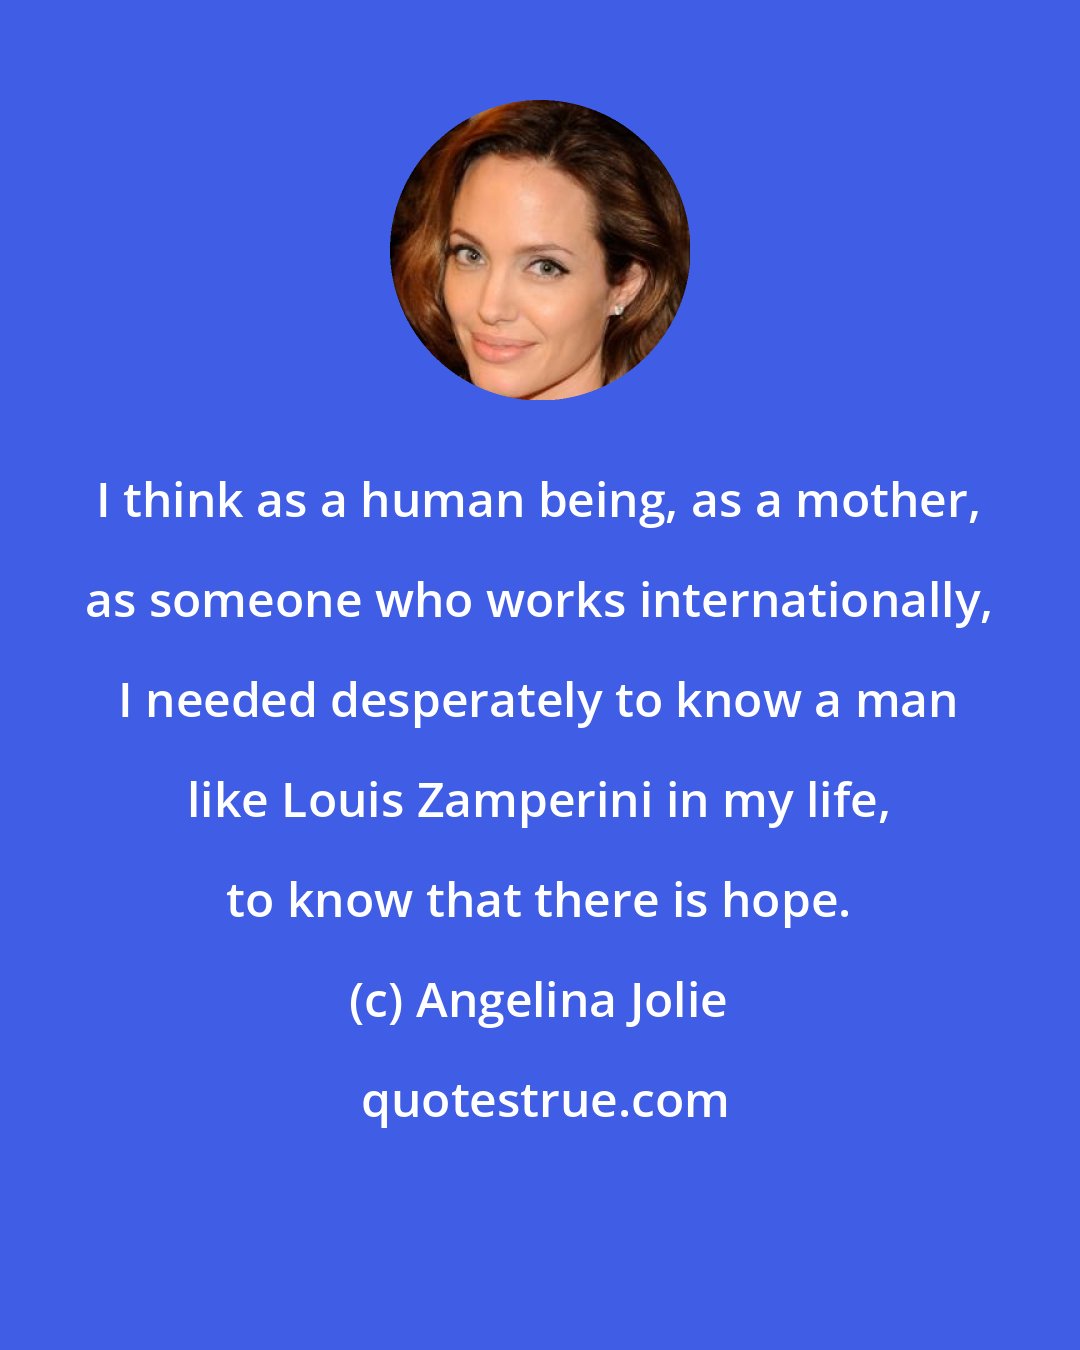 Angelina Jolie: I think as a human being, as a mother, as someone who works internationally, I needed desperately to know a man like Louis Zamperini in my life, to know that there is hope.